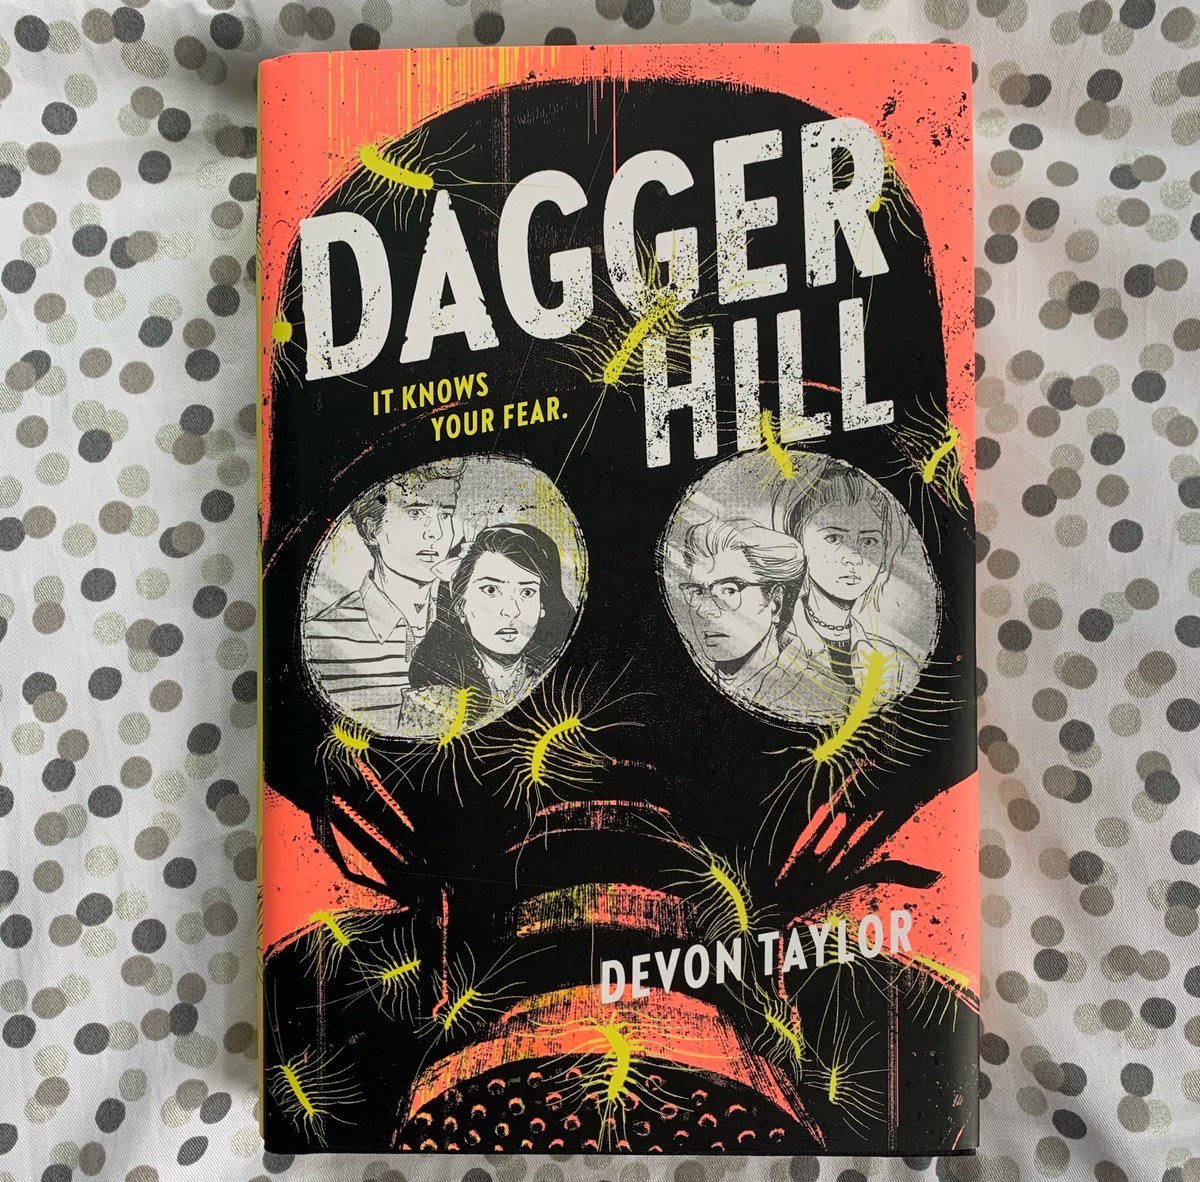 It’s here! It’s here! Spooky Summer continues with DAGGER HILL by @devontwrites, out today. We can’t wait for you to dive into this one.